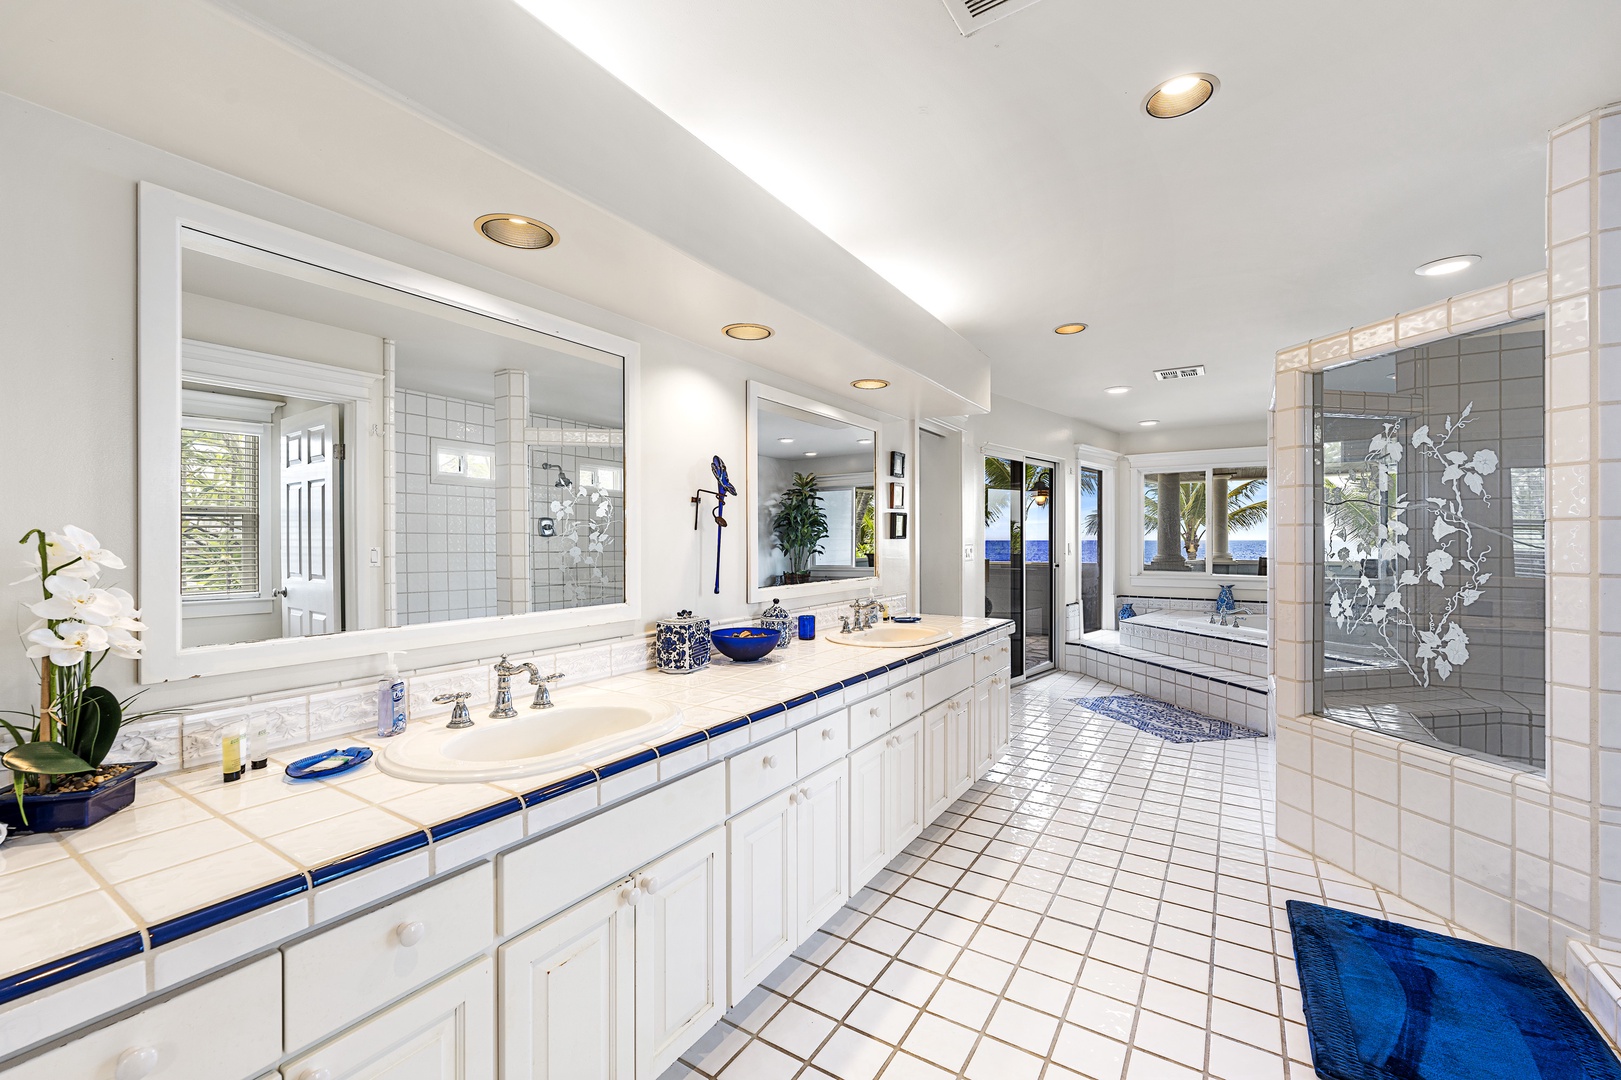 Kailua Kona Vacation Rentals, Kona Blue - Primary Bathroom equipped with dual vanities, walk in shower and oversized soaking tub